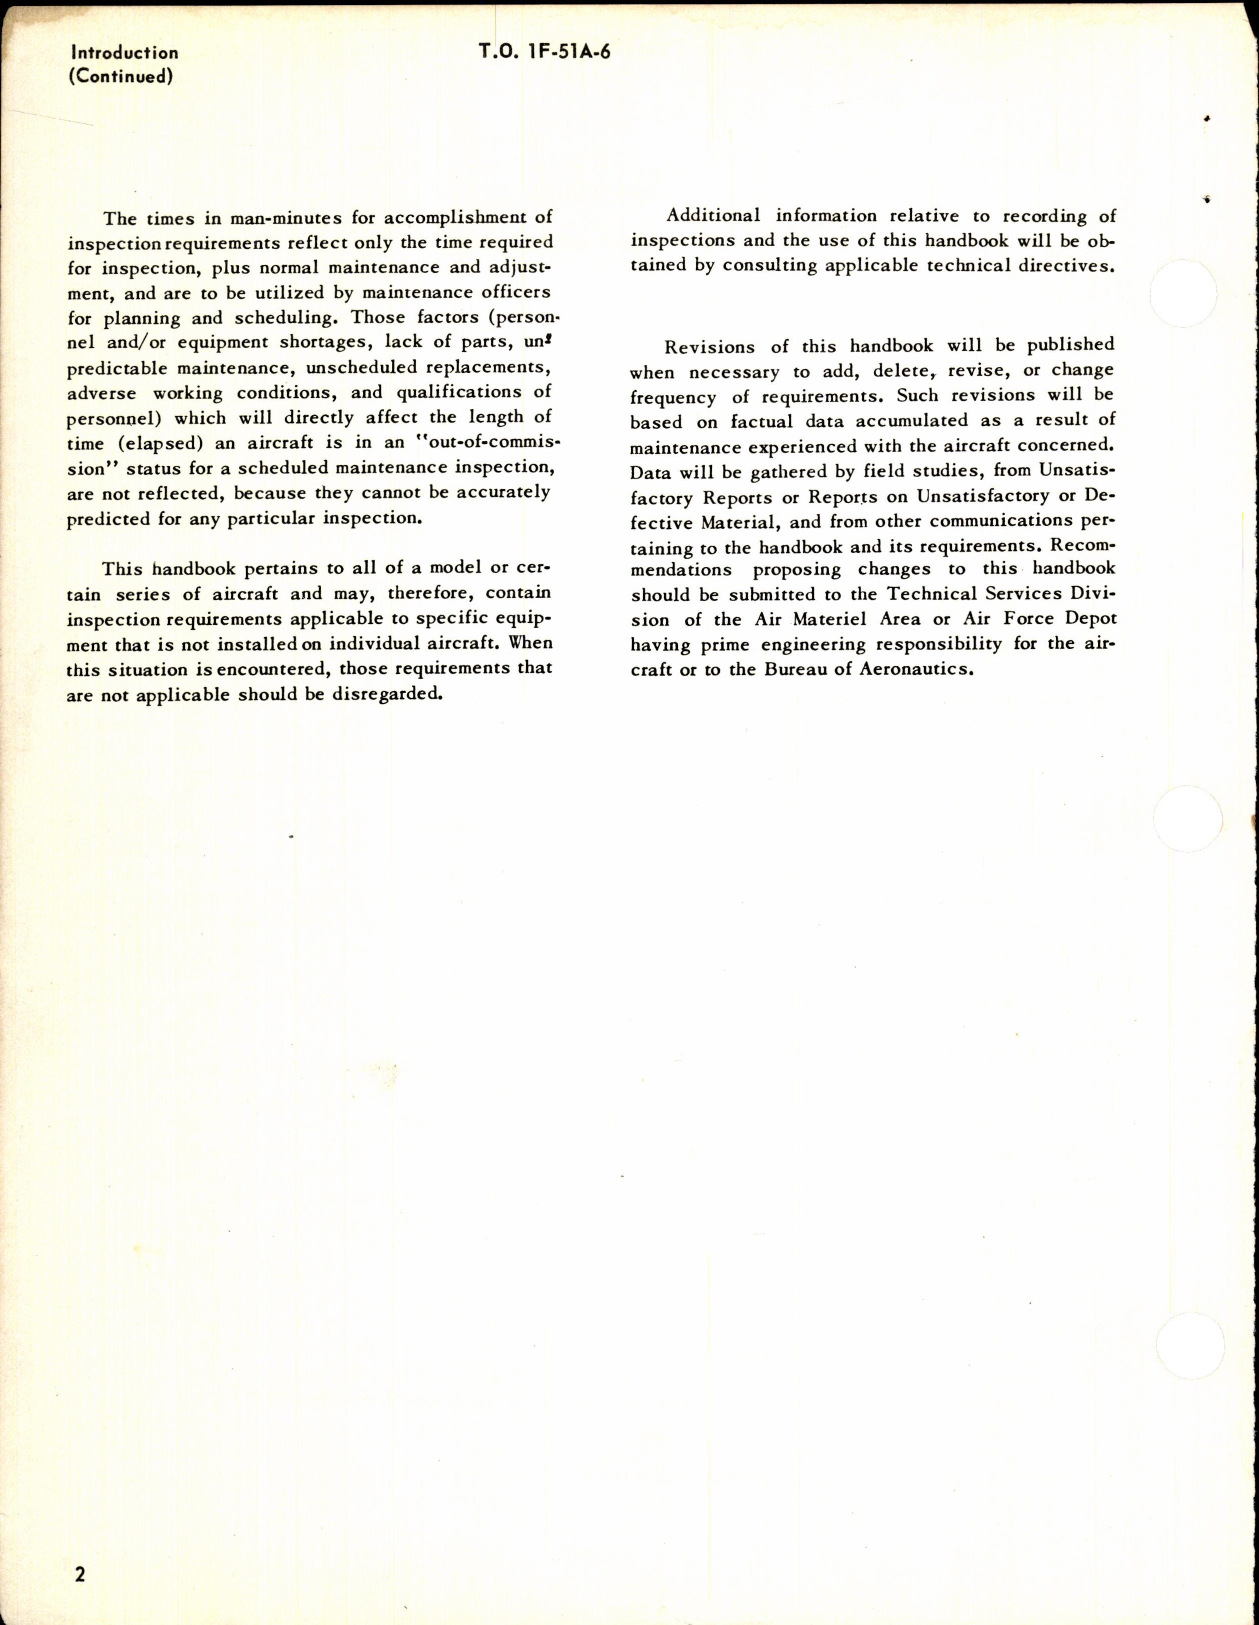 Sample page 4 from AirCorps Library document: T.O. No. 1F-51A-6, Inspection Requirements for USAF F-51 Series Aircraft, 1-July-1954